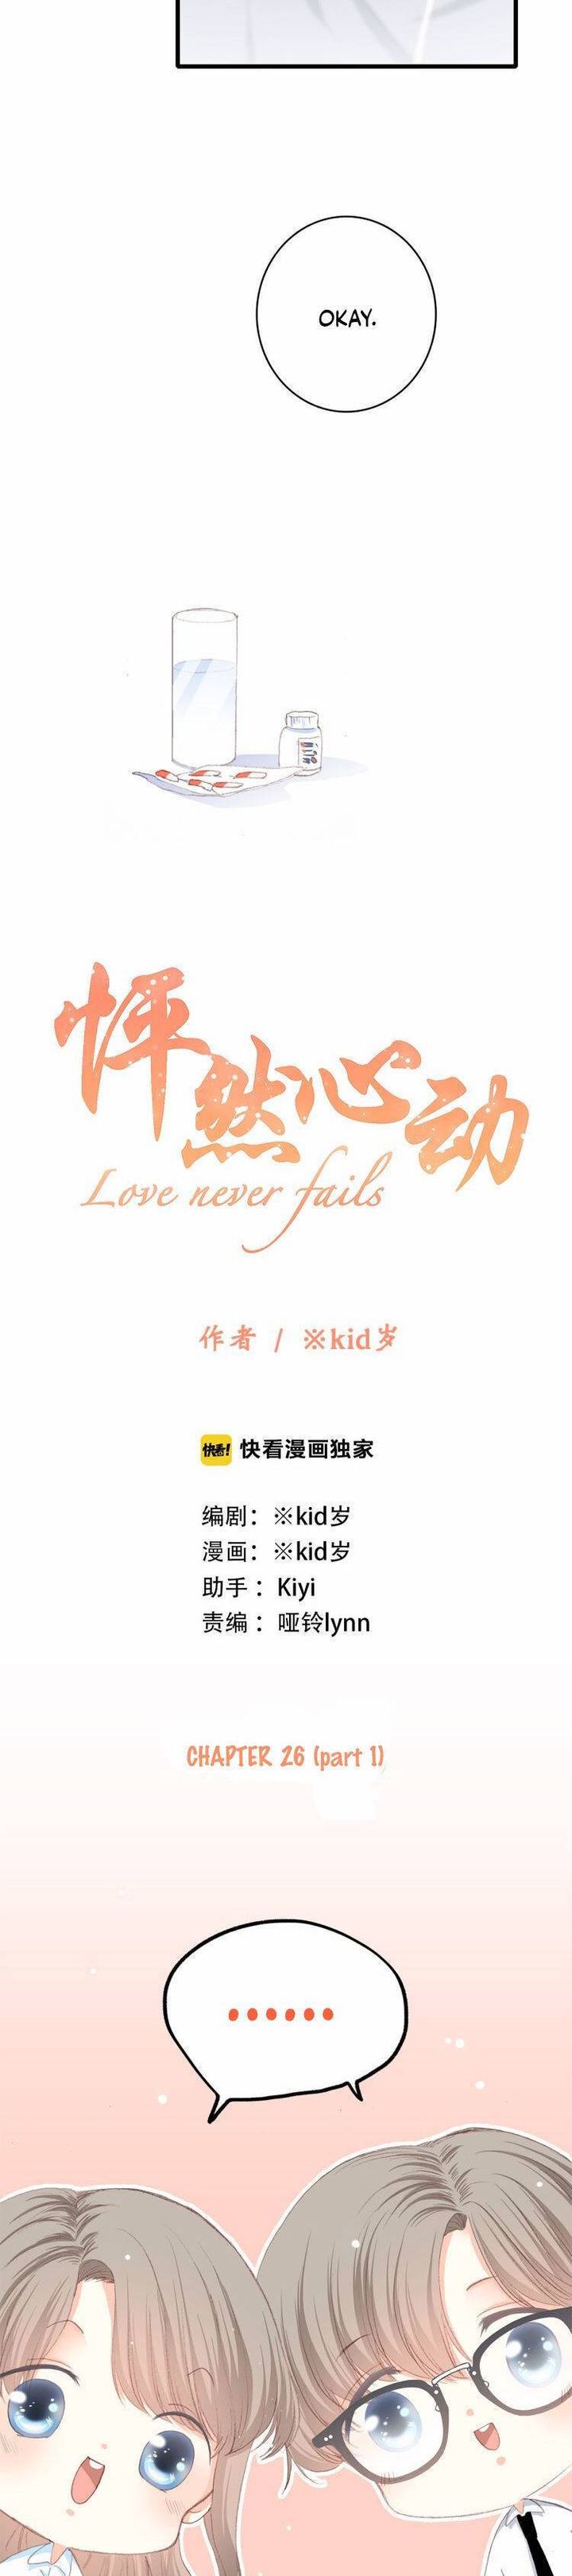 Love Never Fails Chapter 26 Page 3